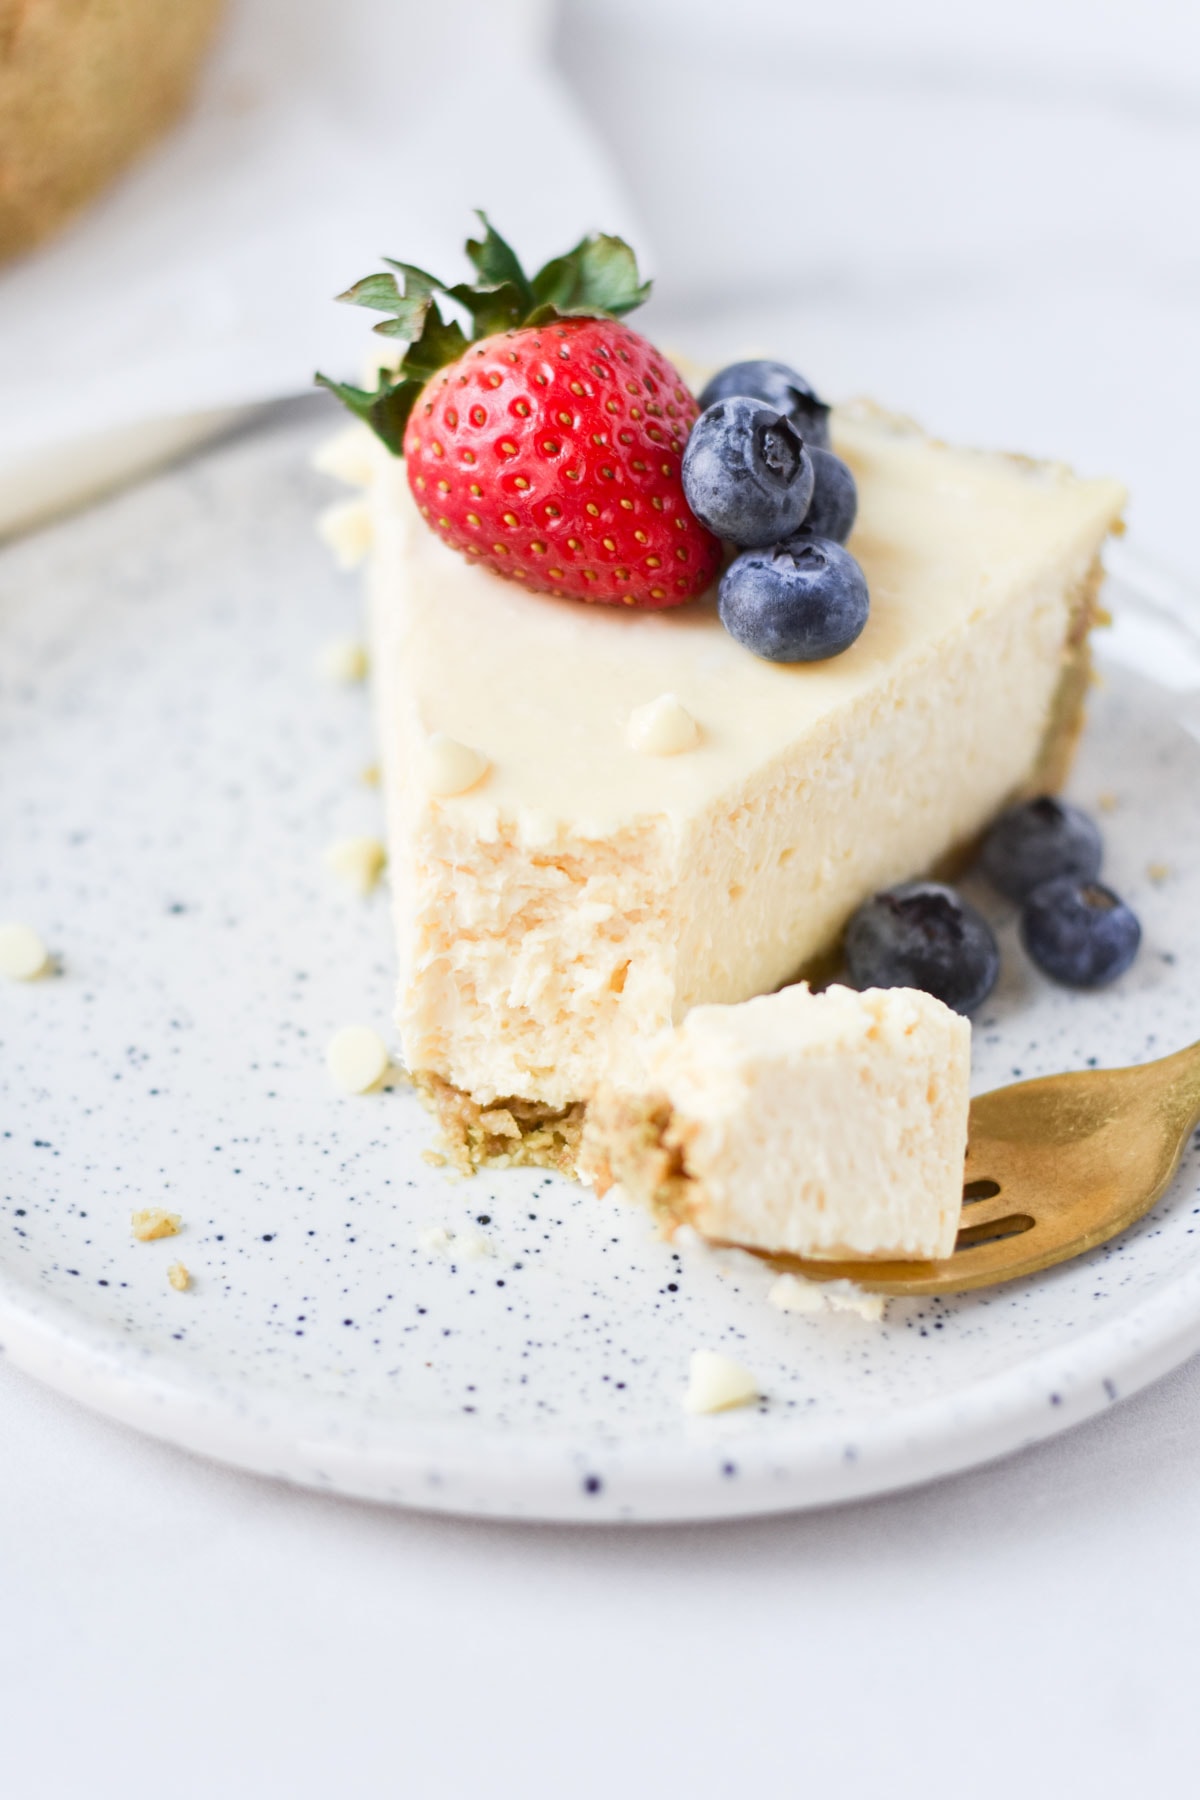 A bite of cheesecake with white chocolate and berries on top.